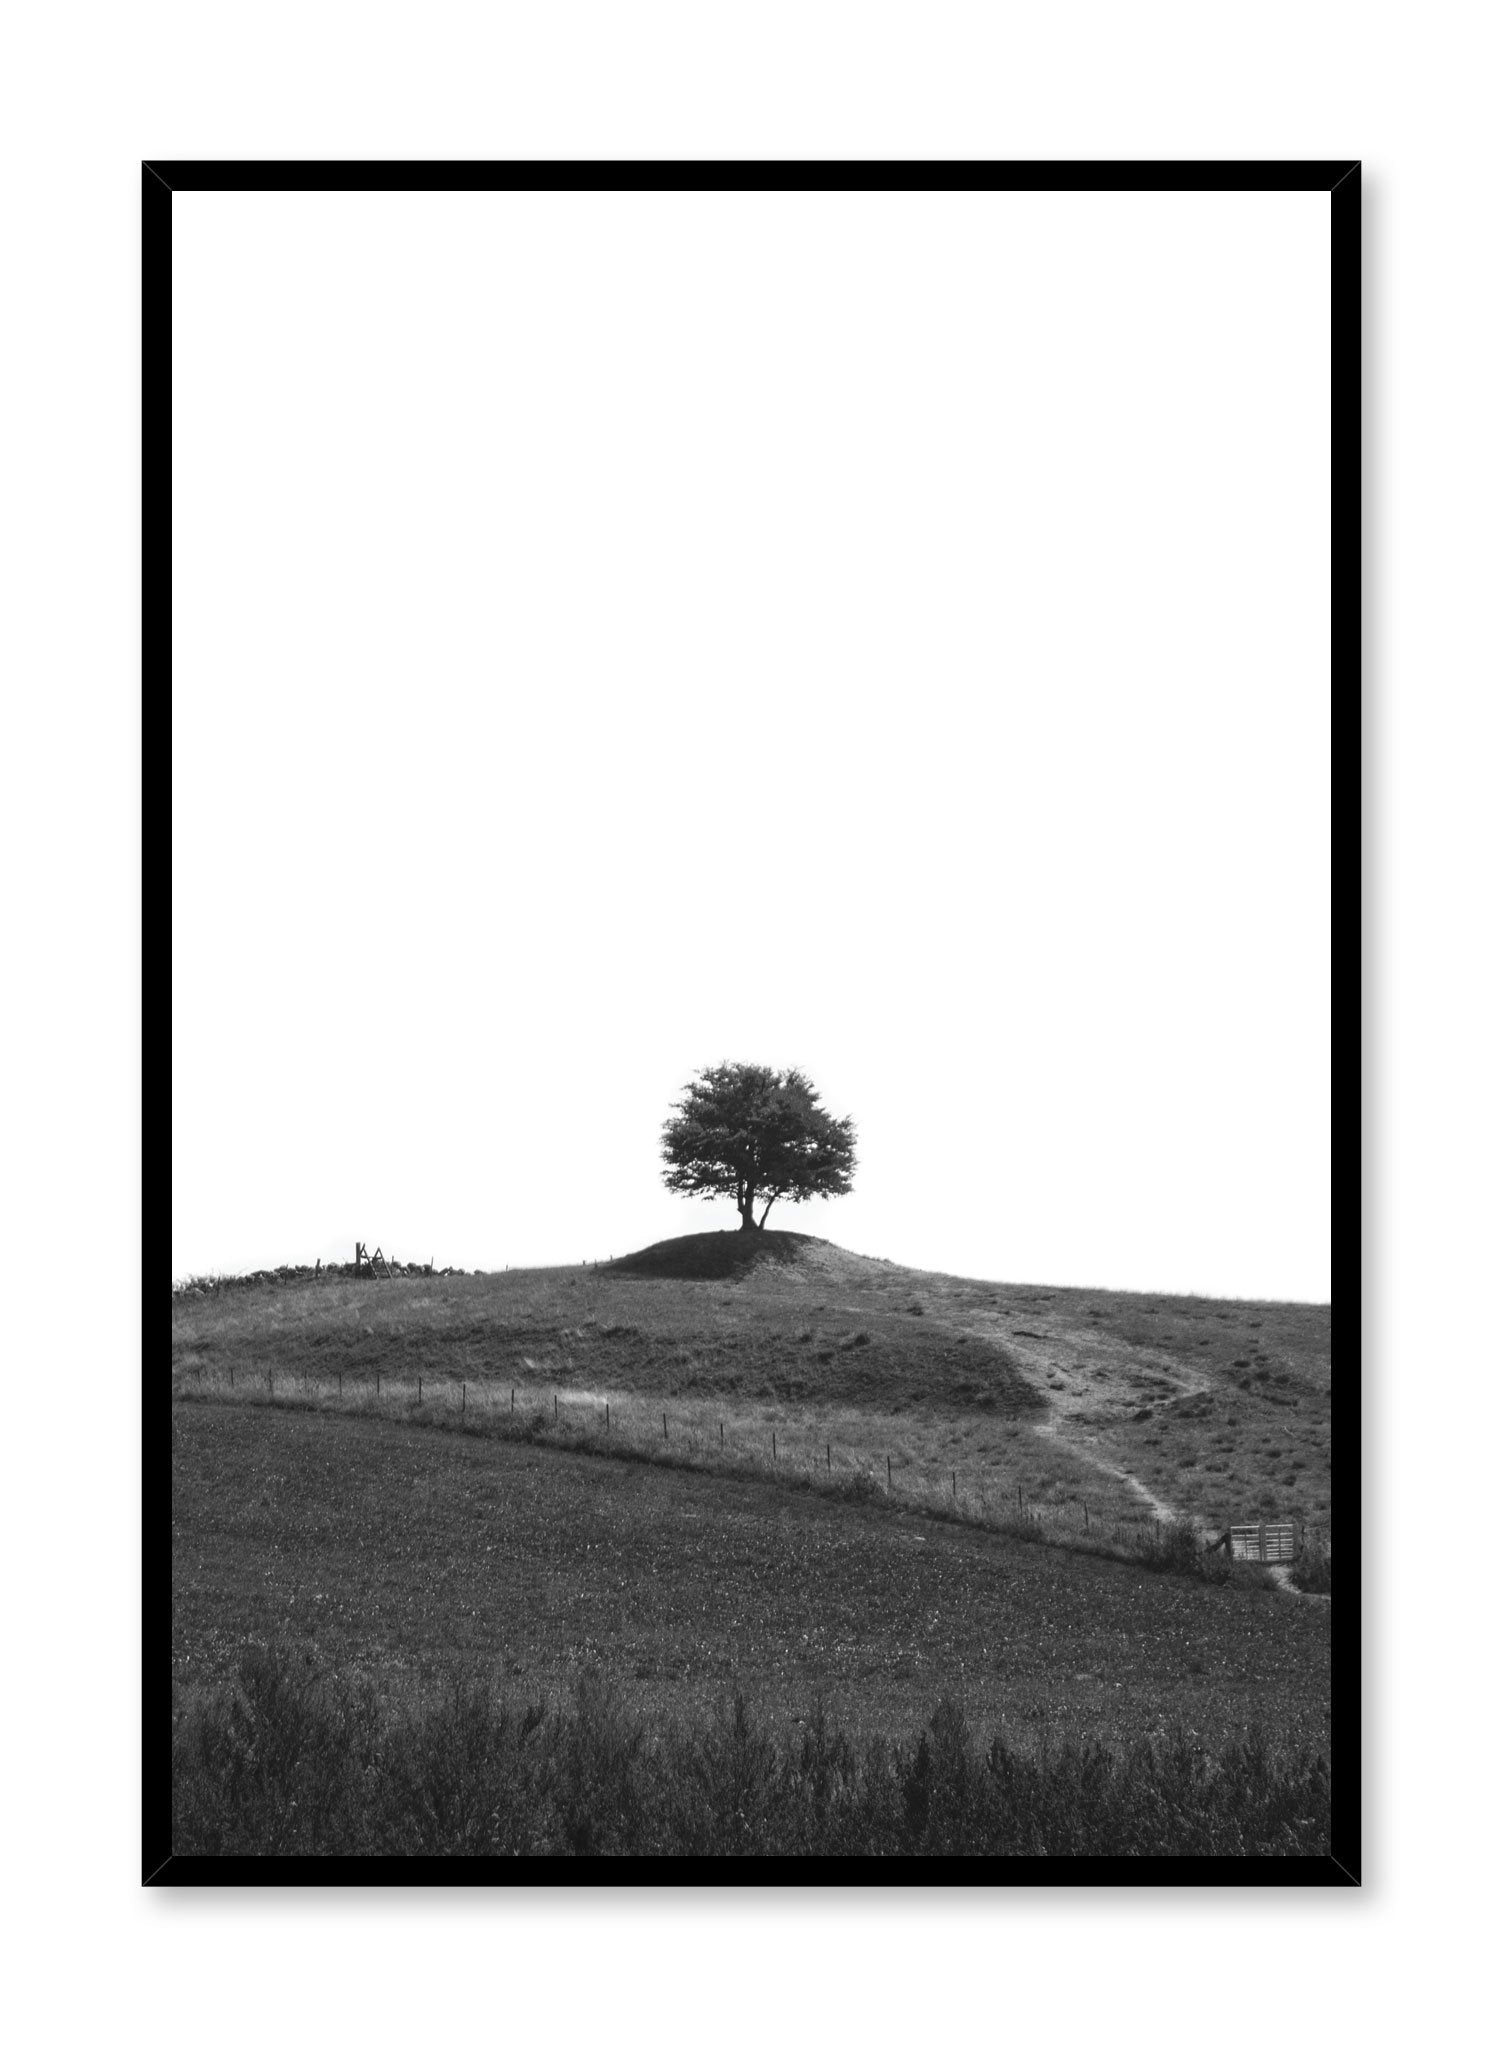 Minimalist design poster by Opposite Wall with Lone Tree photography